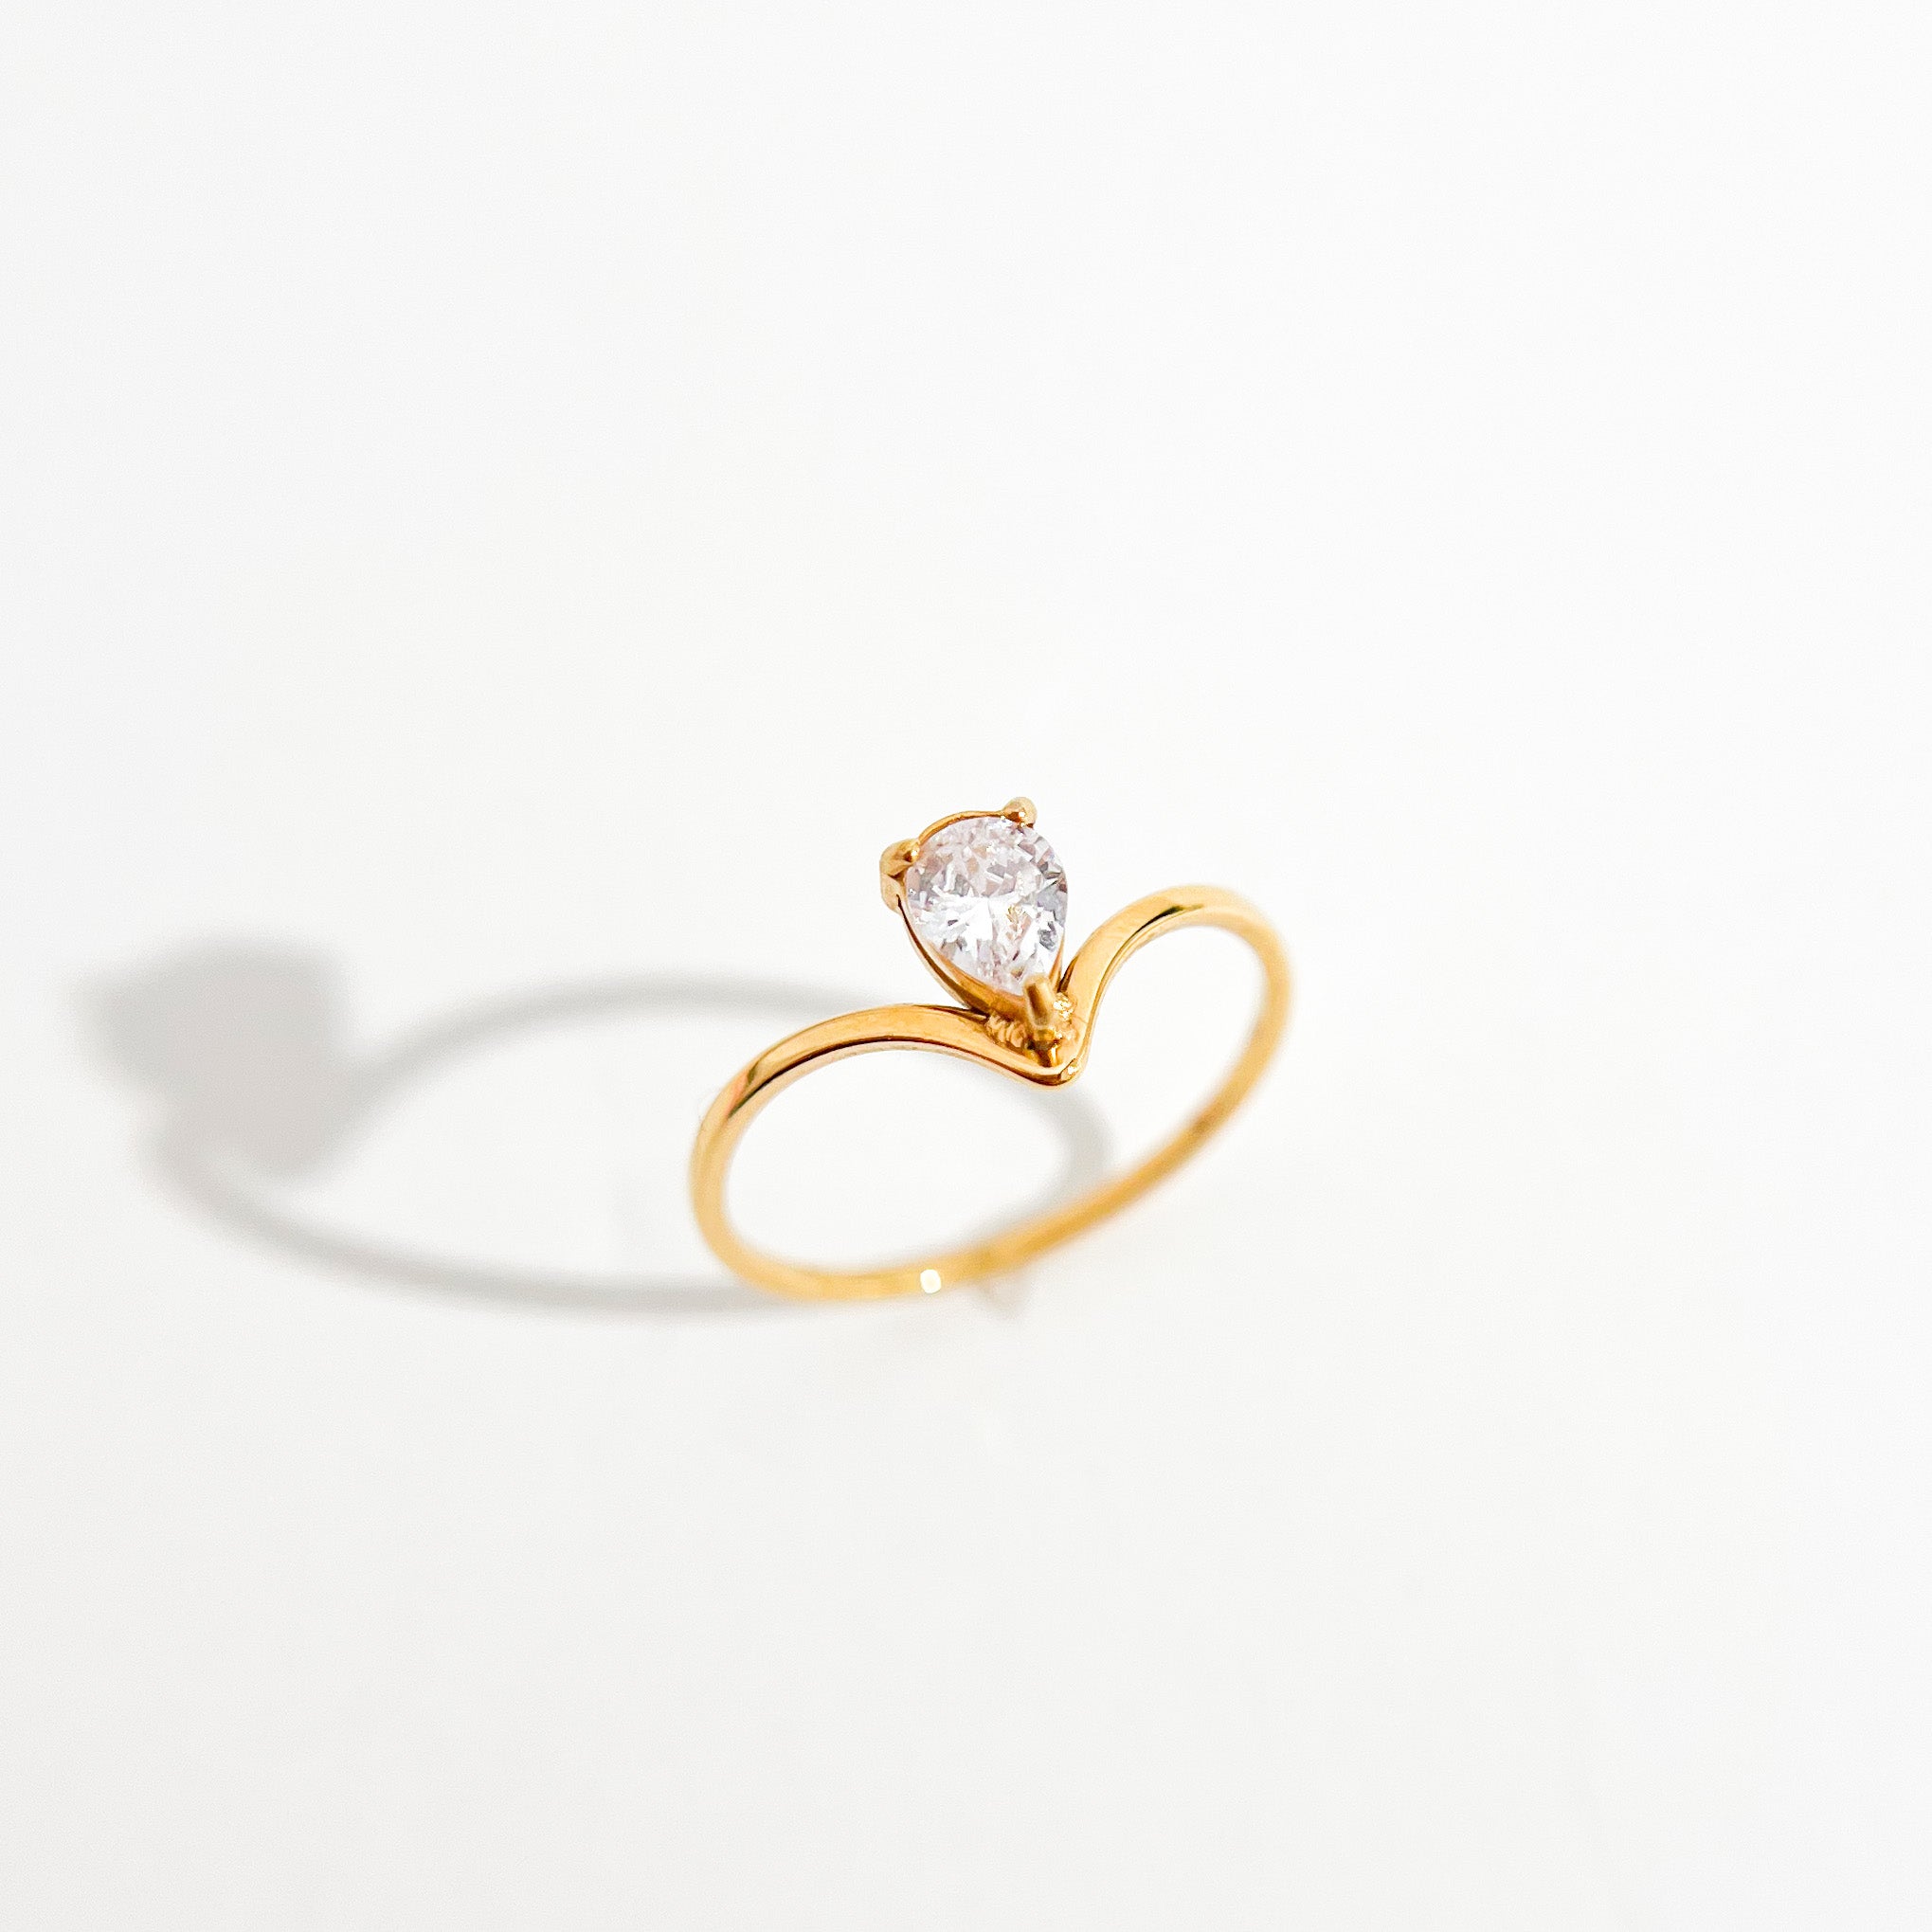 Tear Drop Gem Ring in Gold - Flaire & Co.